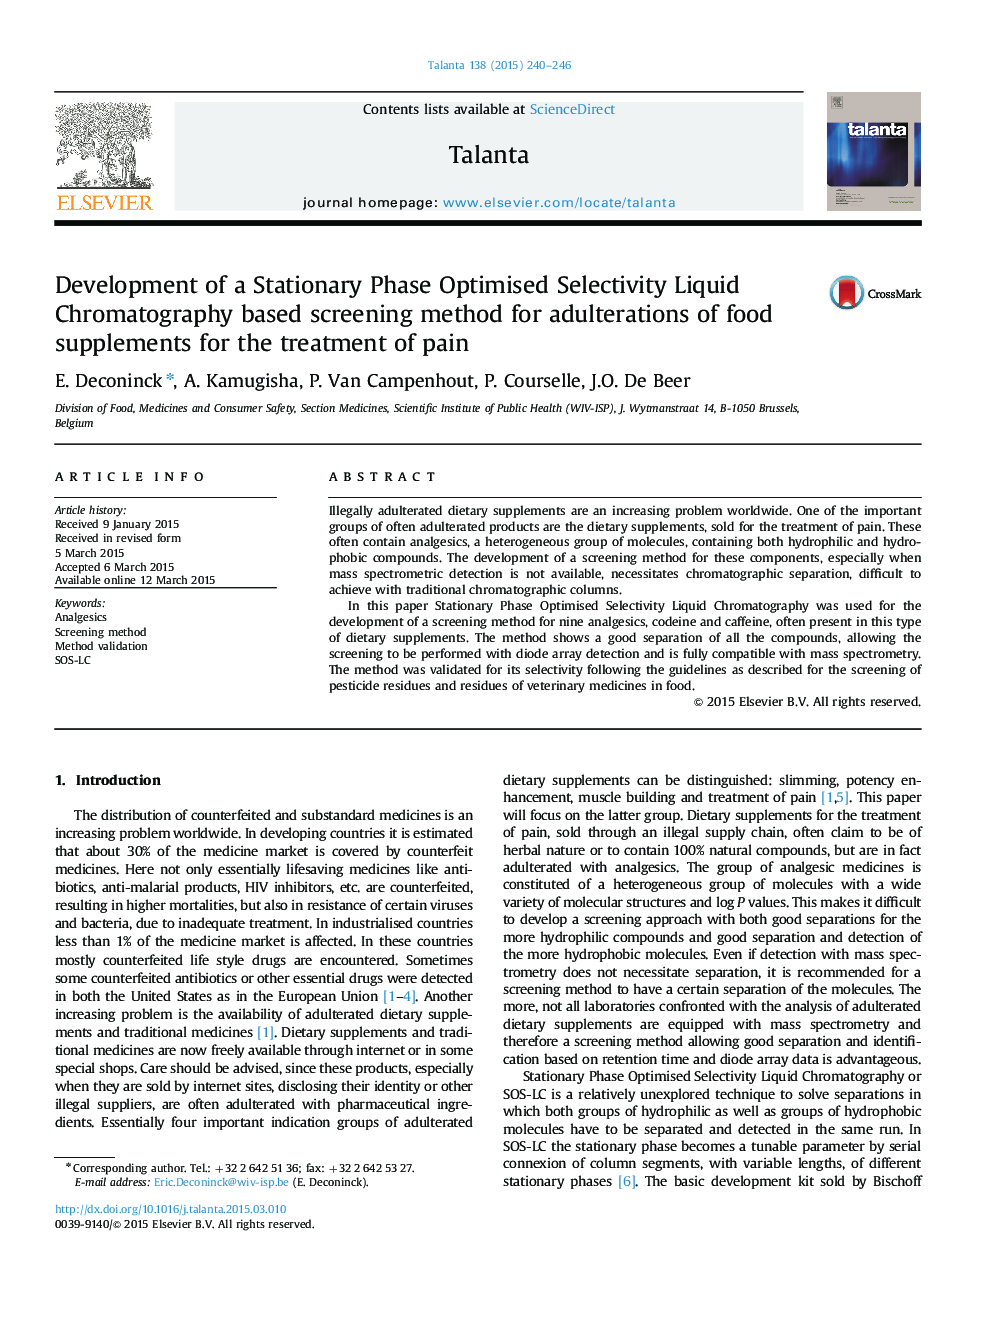 Development of a Stationary Phase Optimised Selectivity Liquid Chromatography based screening method for adulterations of food supplements for the treatment of pain